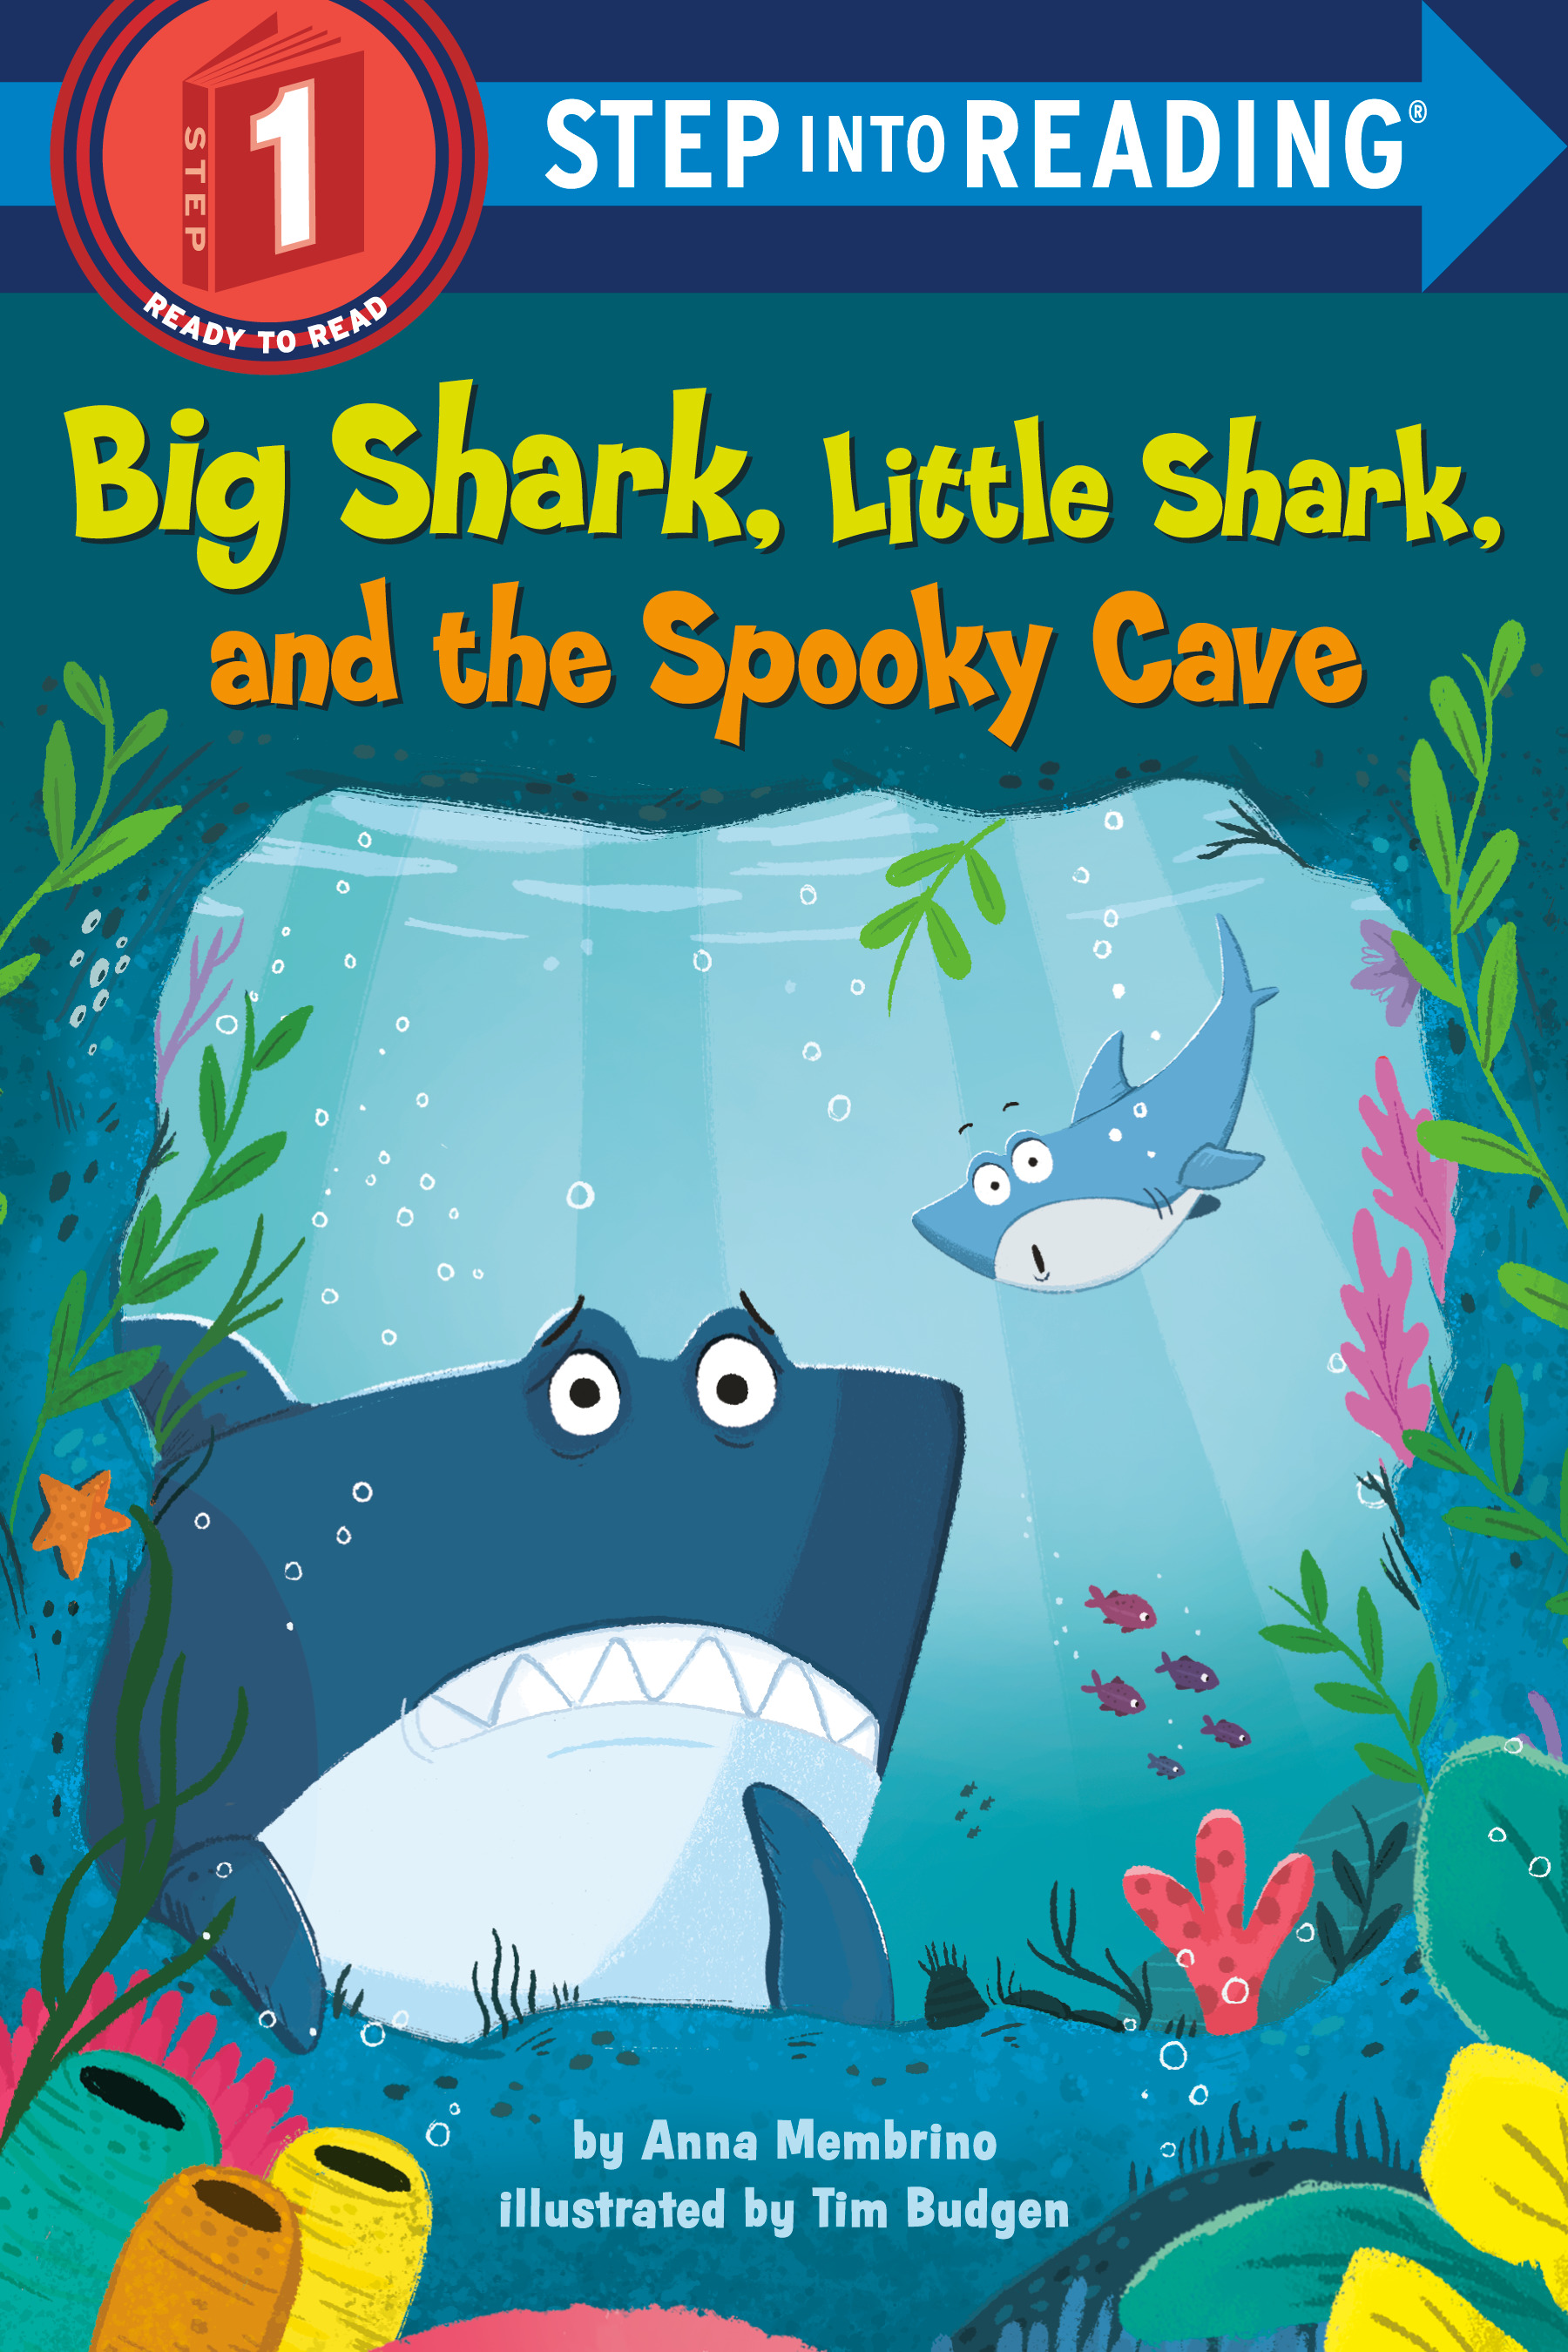 Step into Reading - Big Shark, Little Shark, and the Spooky Cave | First reader